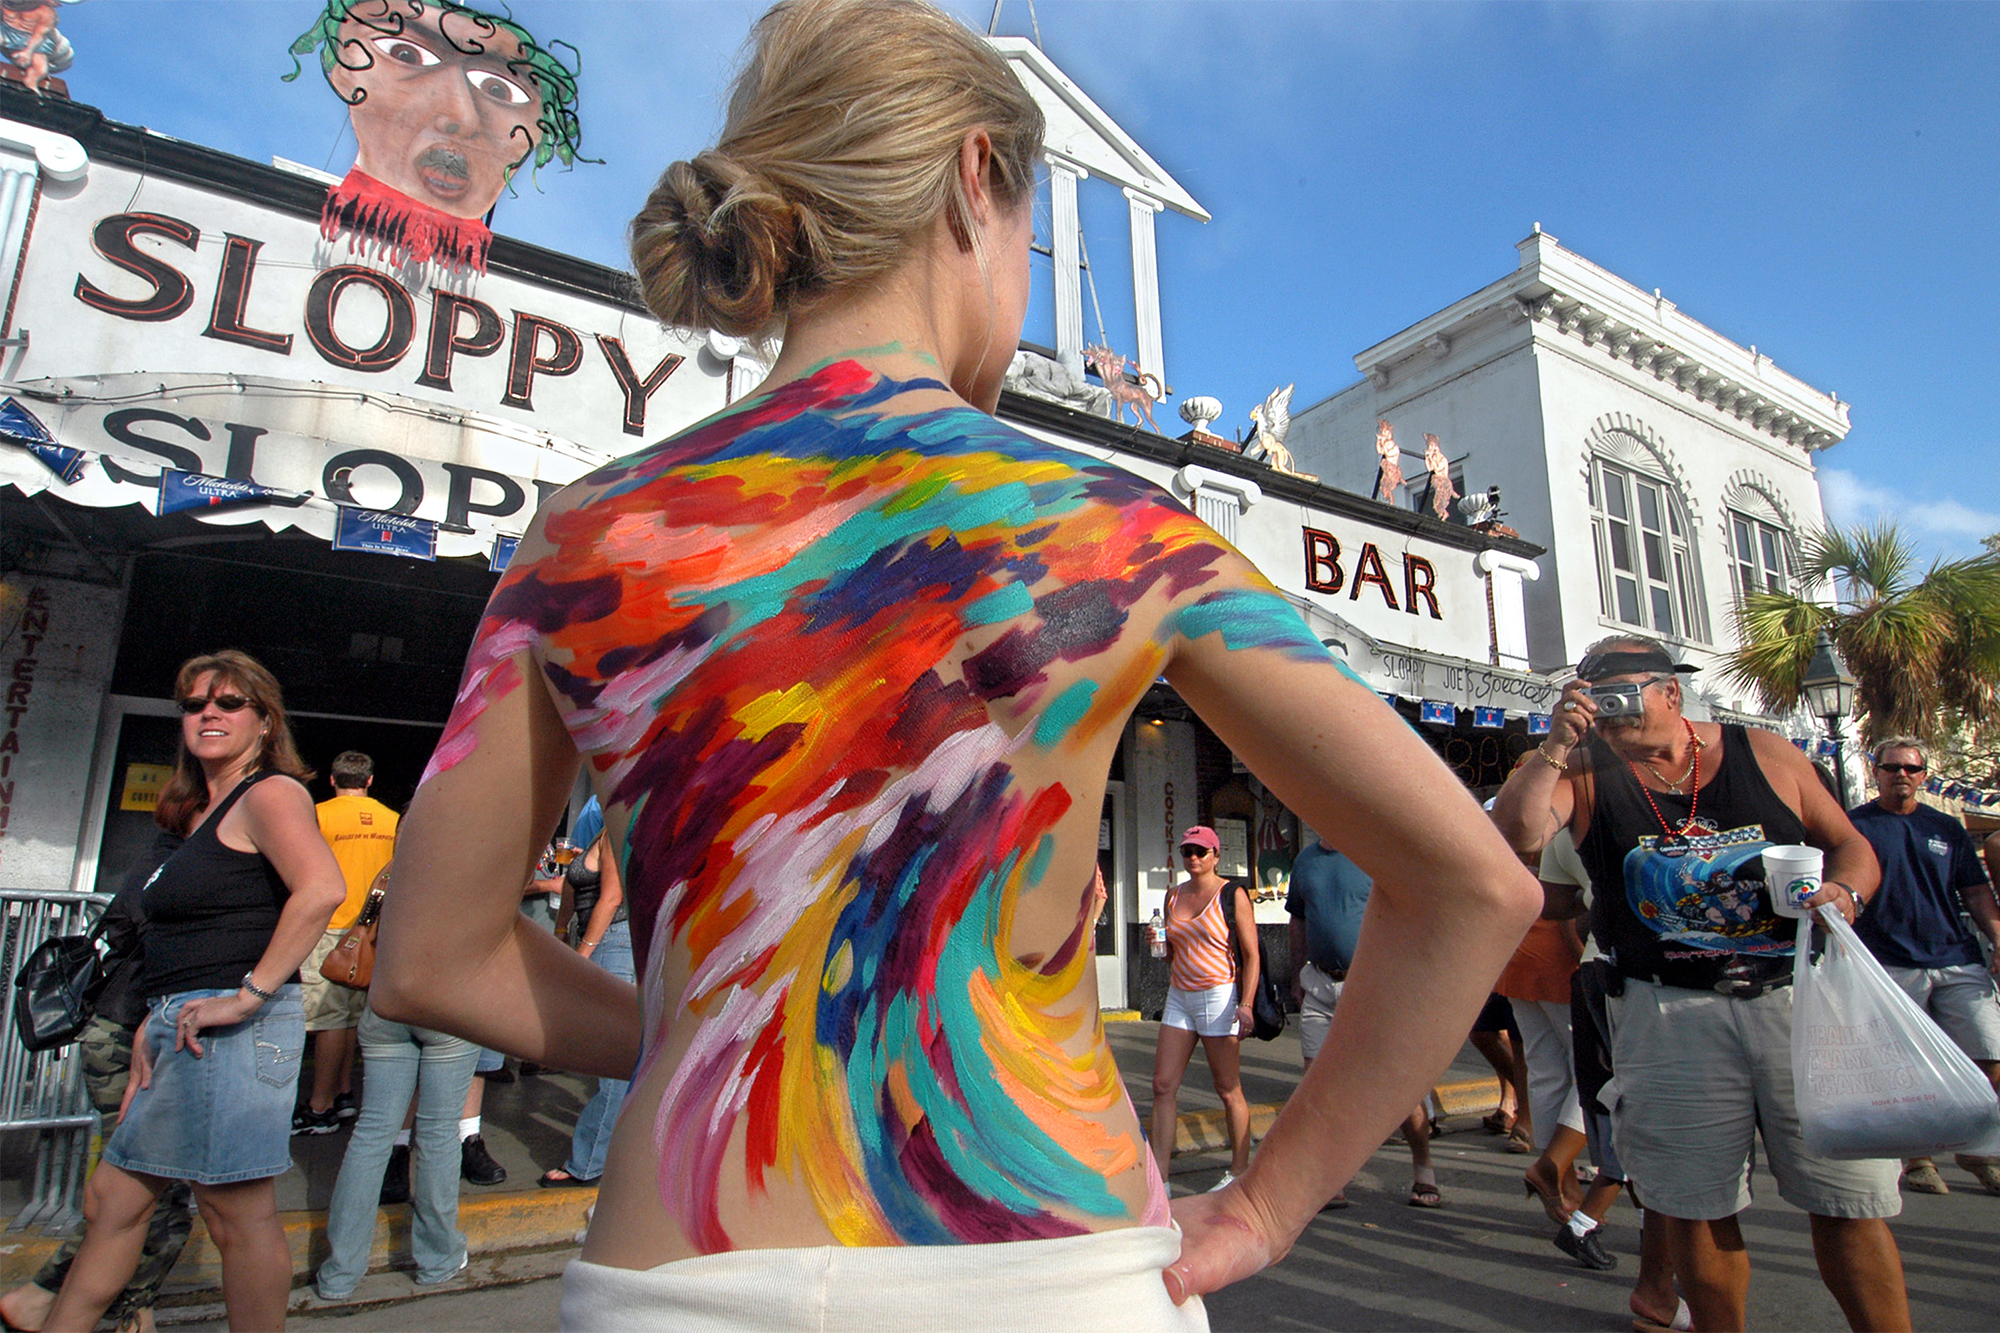 christopher james scott recommends topless bar key west pic